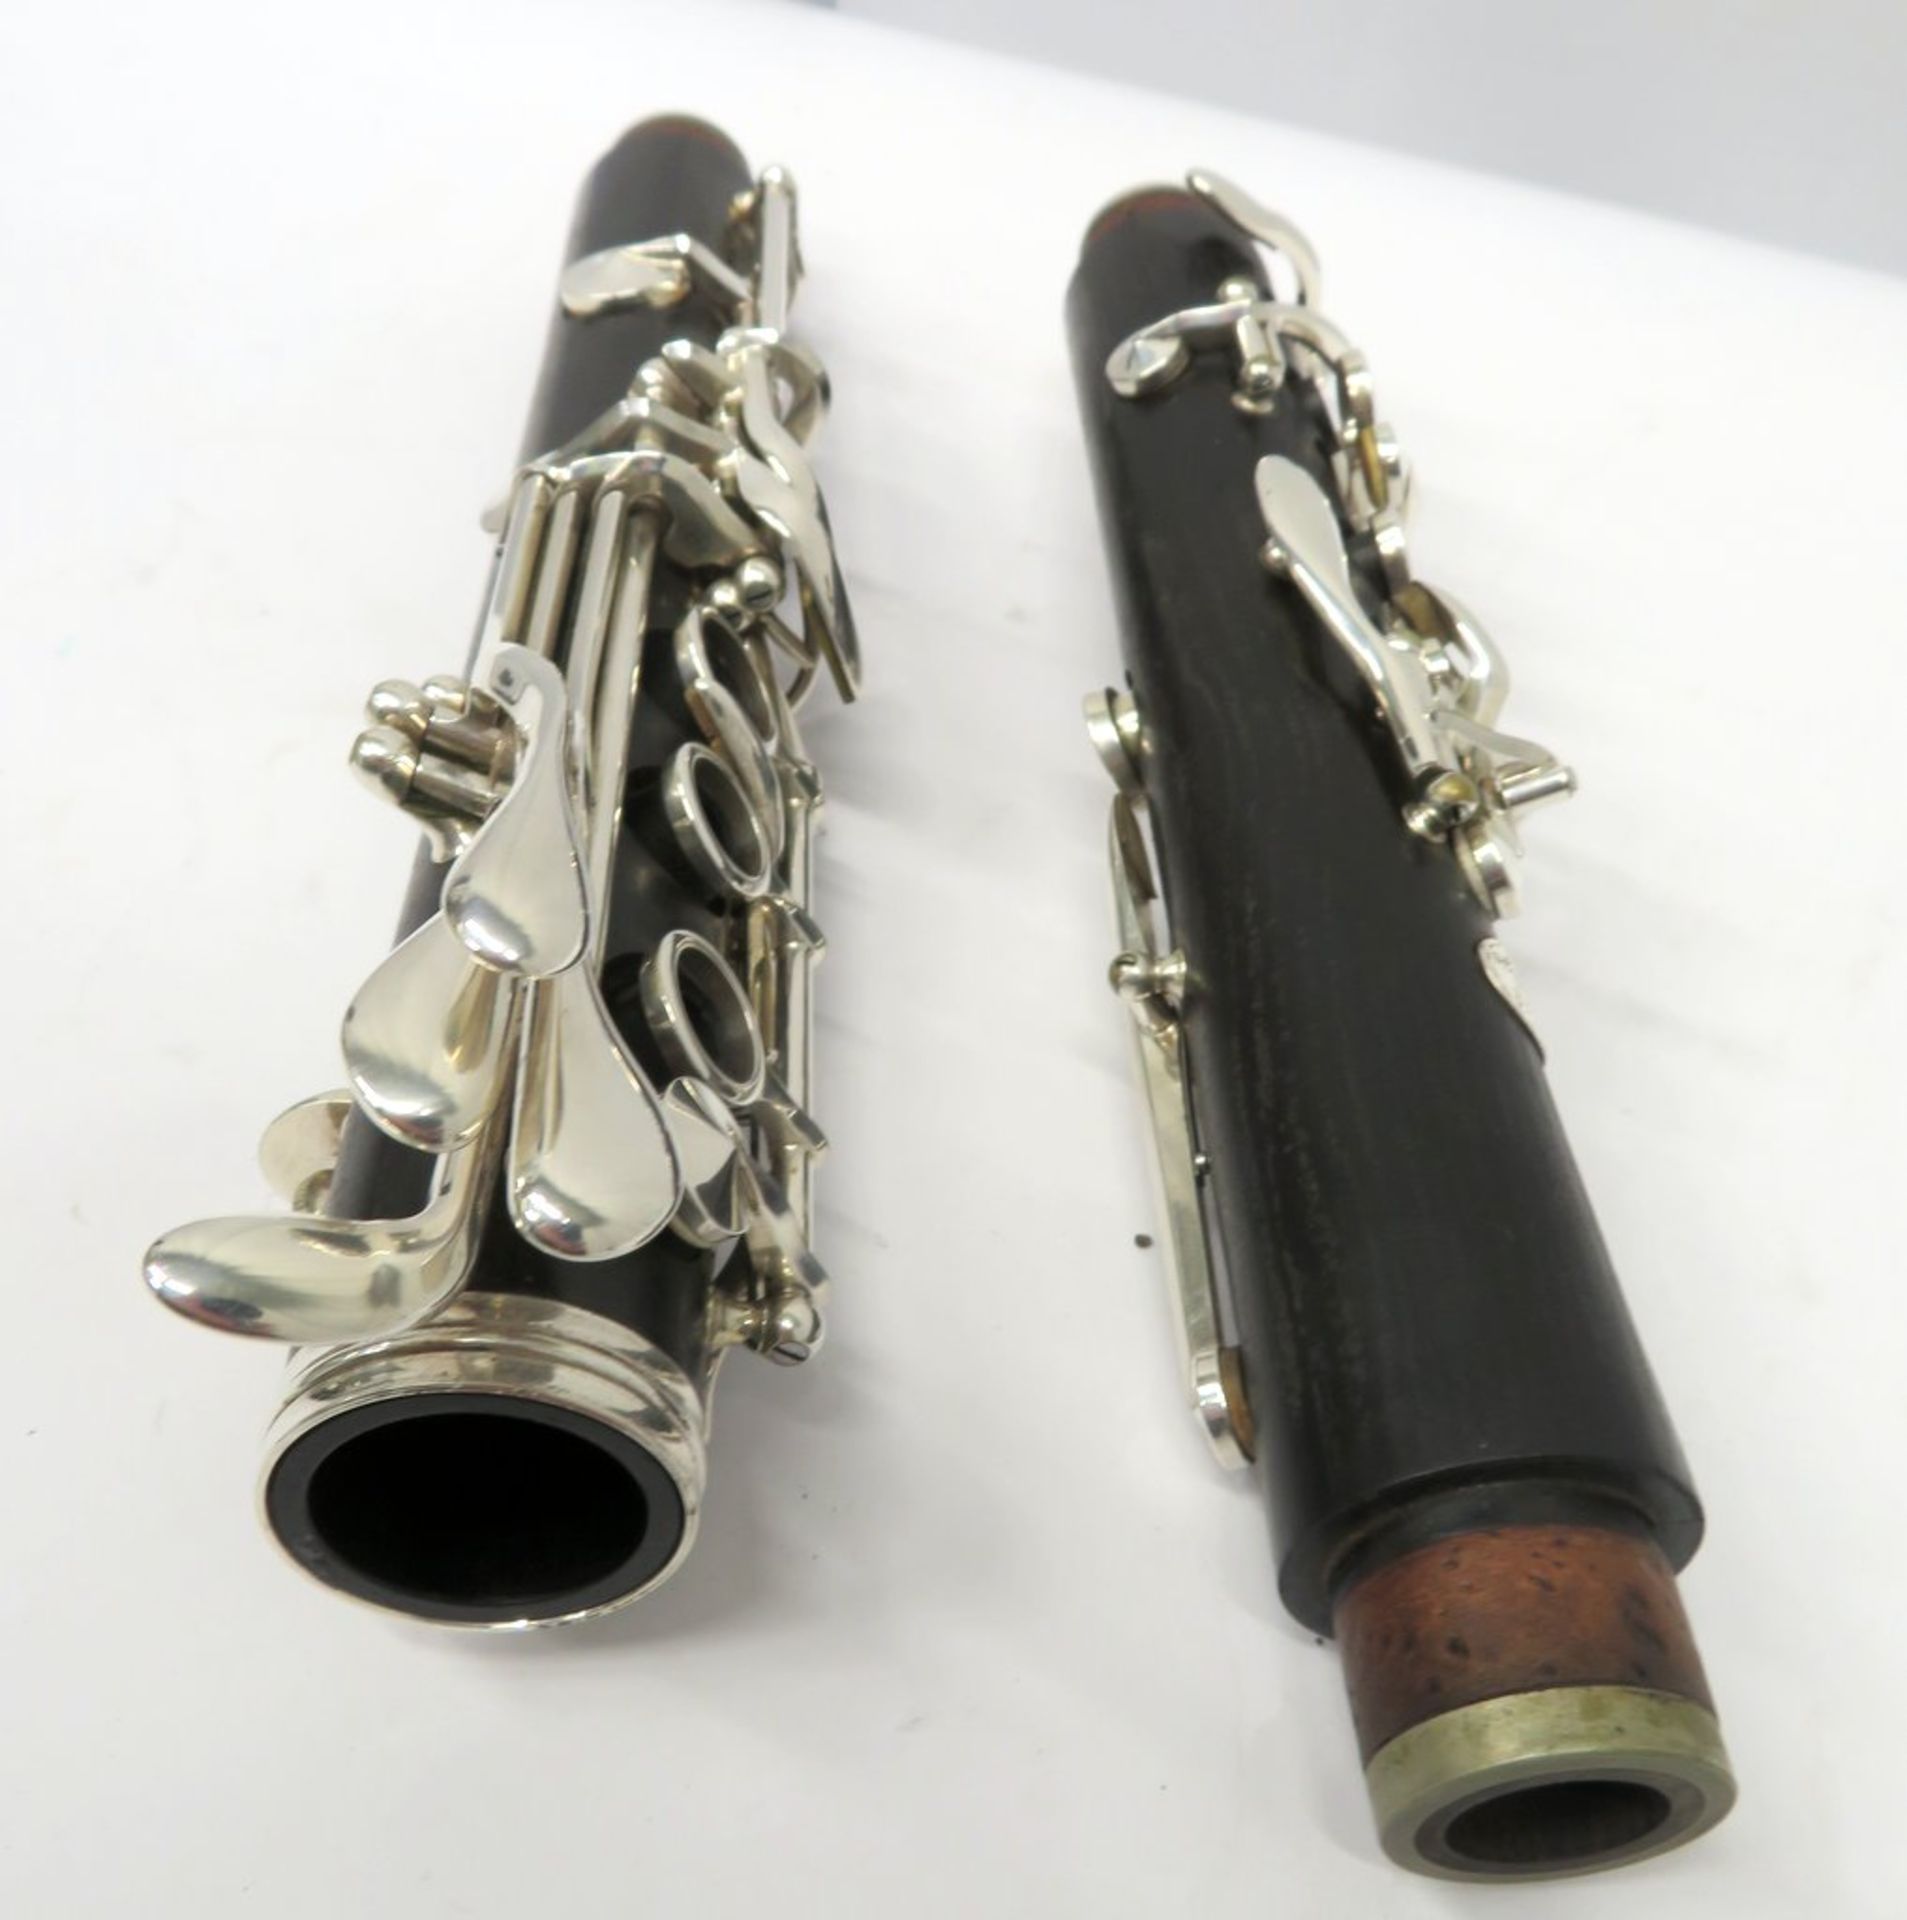 Buffet Crampon Prestige R13 Clarinet Complete With Case. - Image 6 of 18